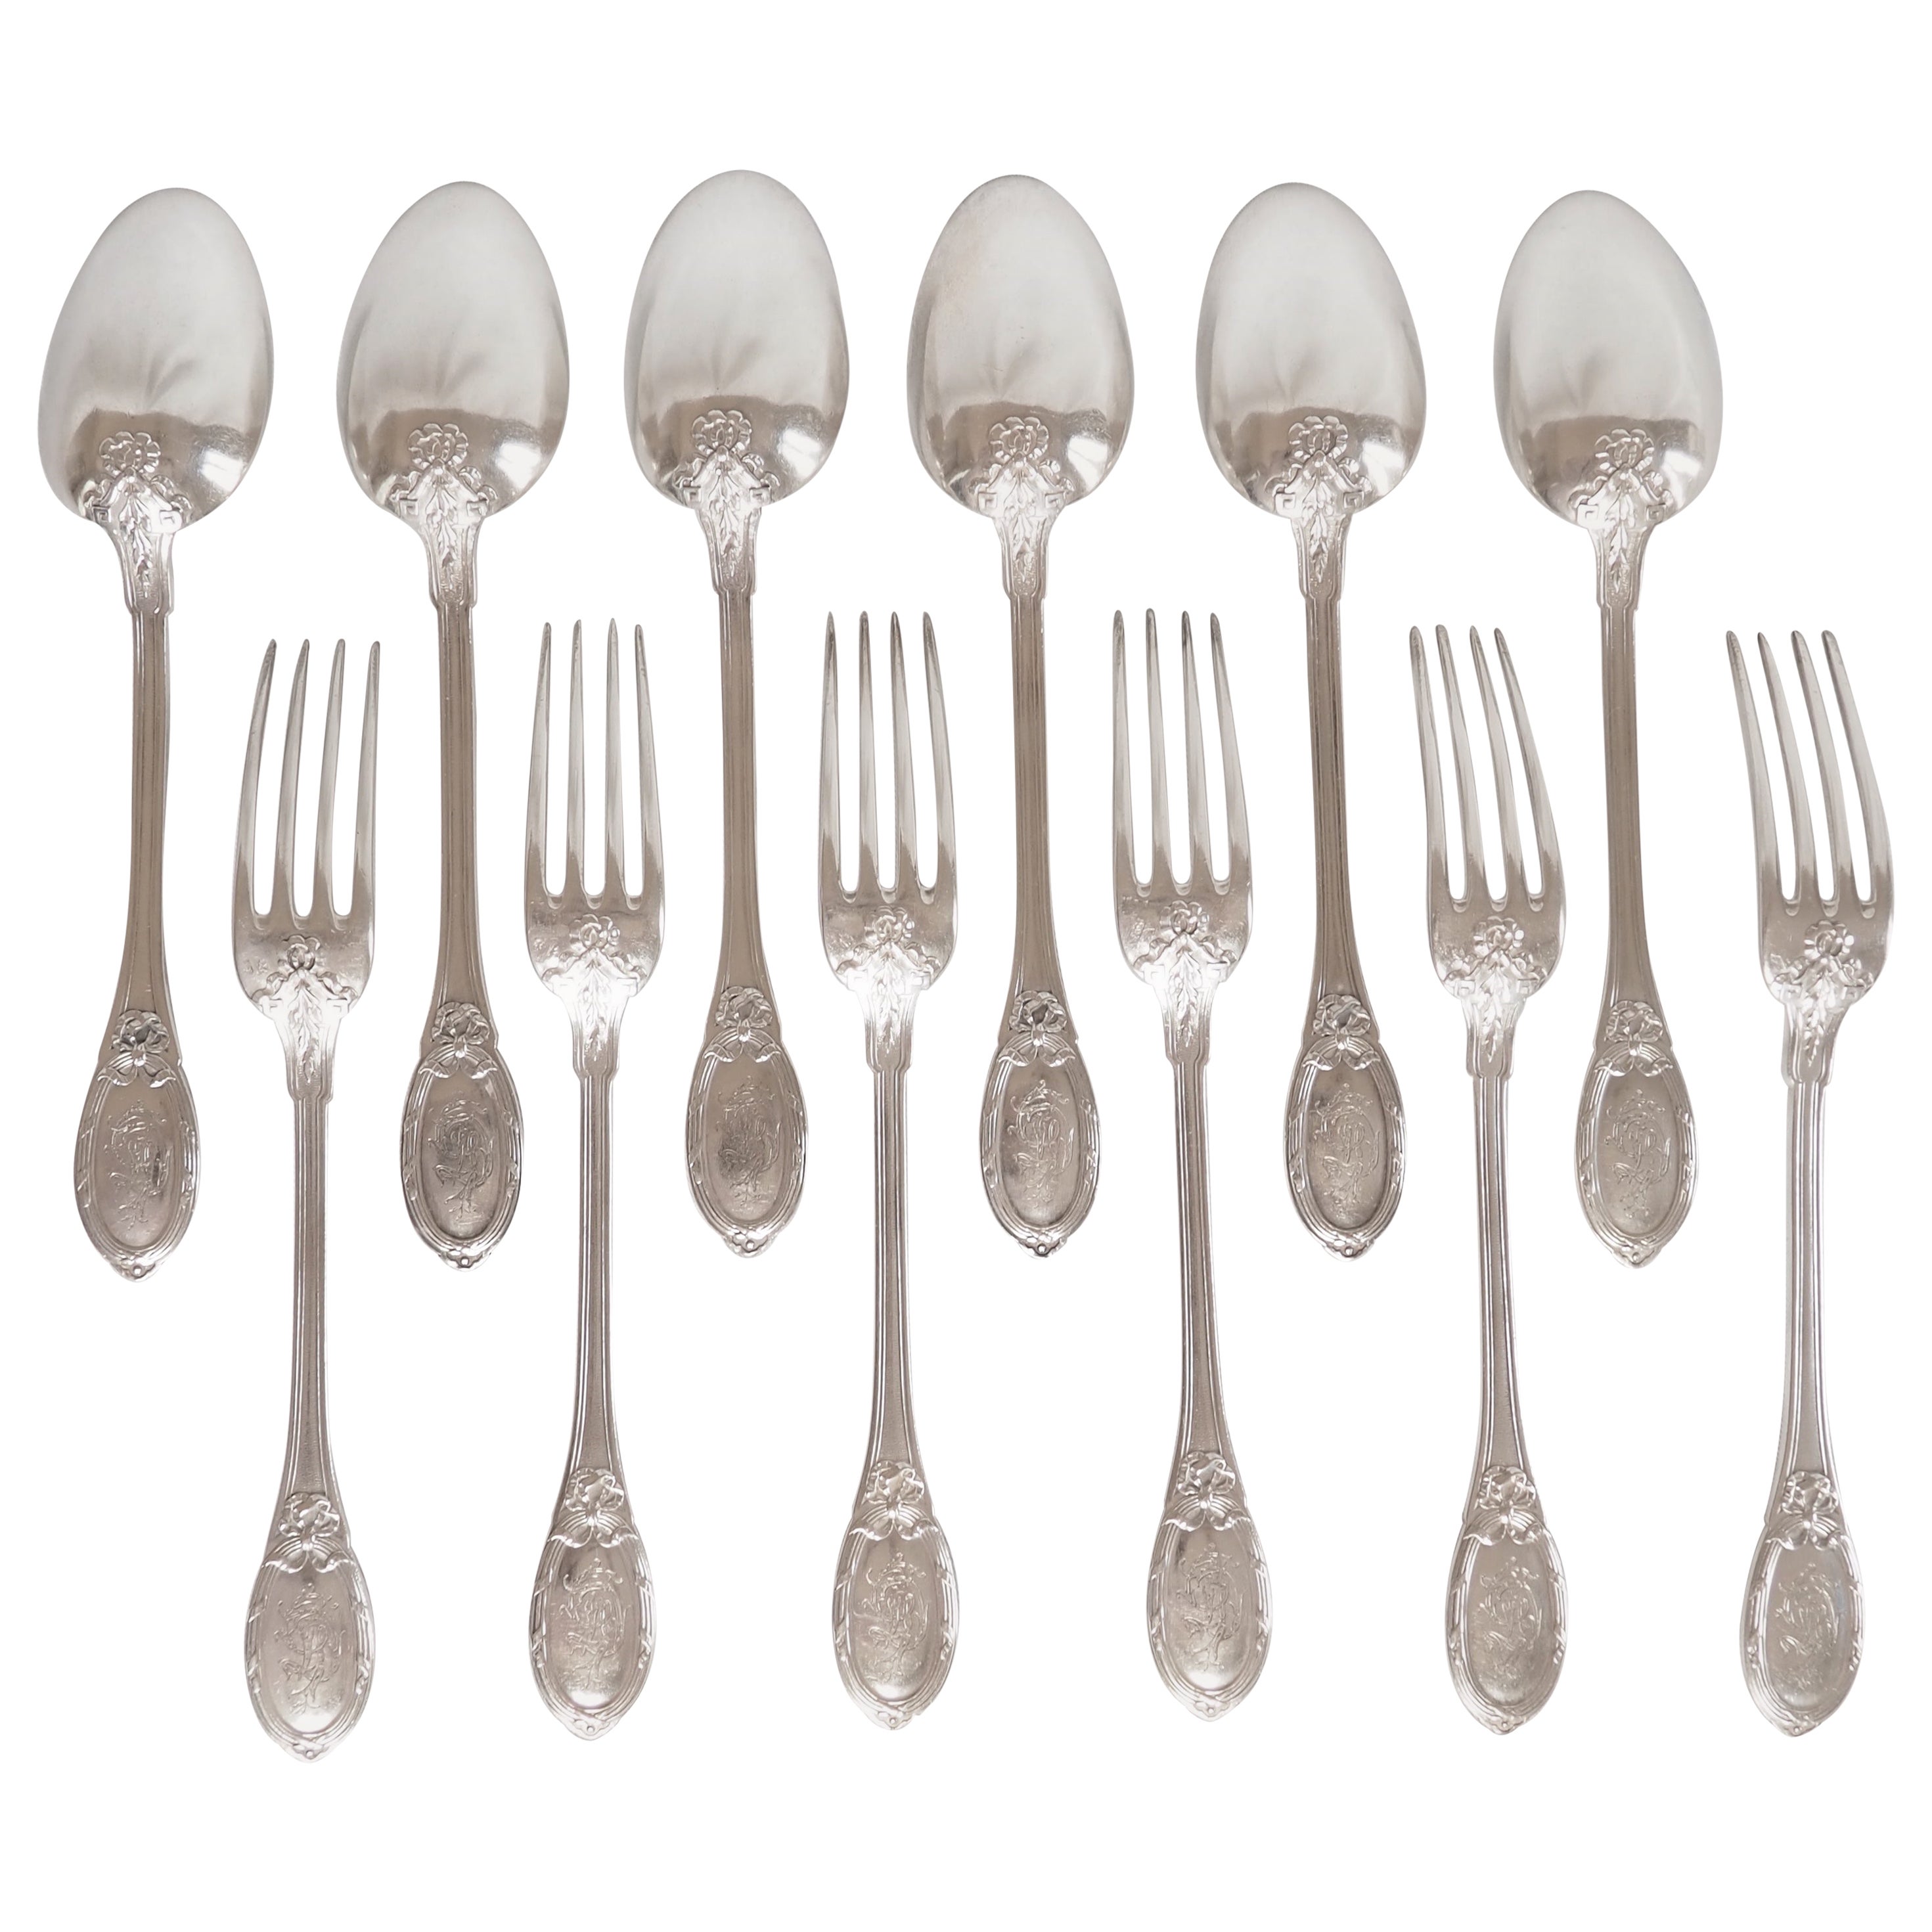 French antique Louis XVI style sterling silver flatware for 6 - Henin & Cie